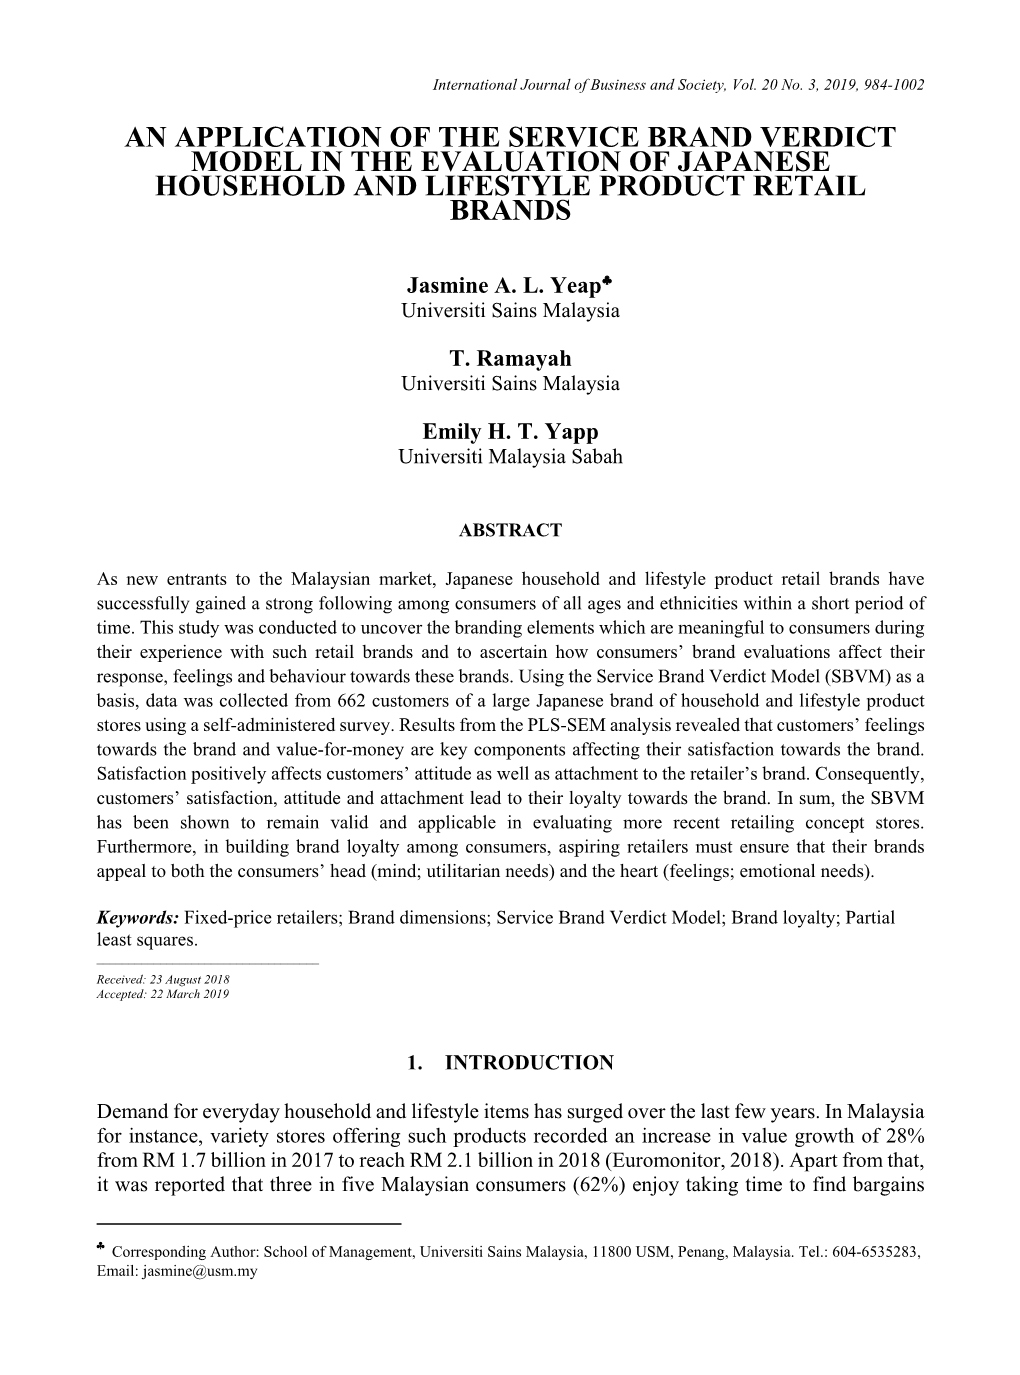 An Application of the Service Brand Verdict Model in the Evaluation of Japanese Household and Lifestyle Product Retail Brands